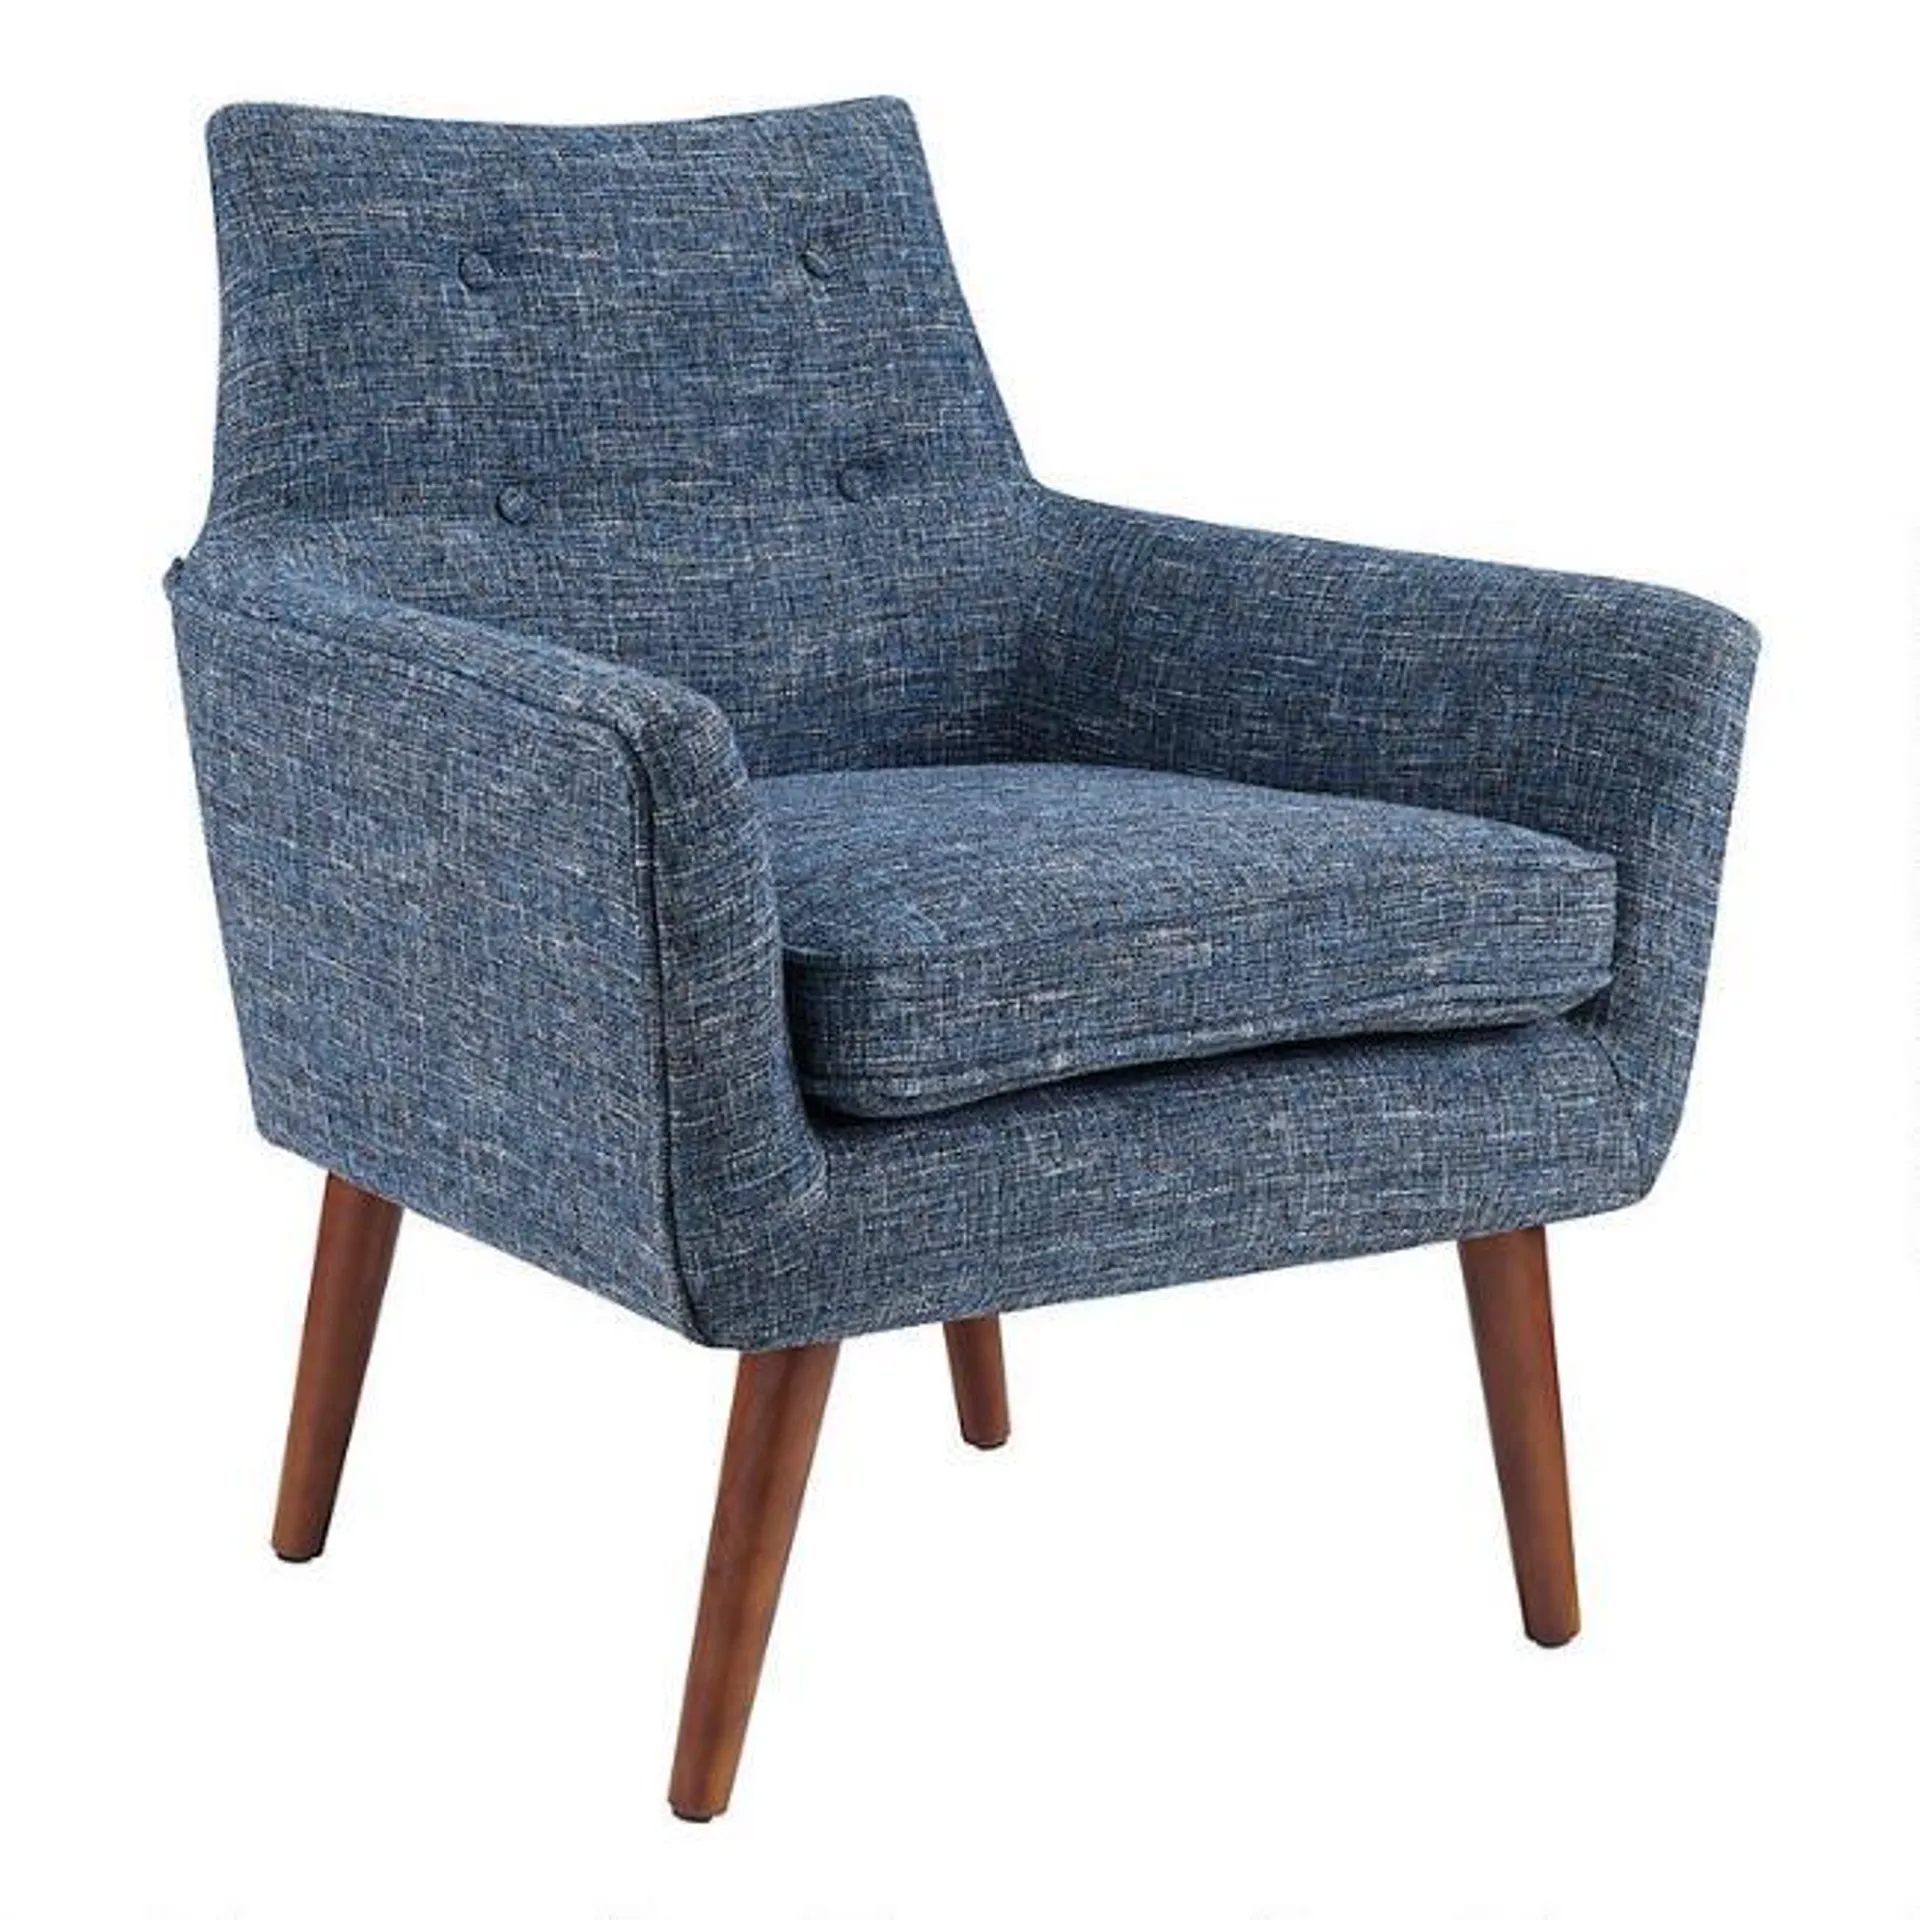 Thompson Tufted Upholstered Chair